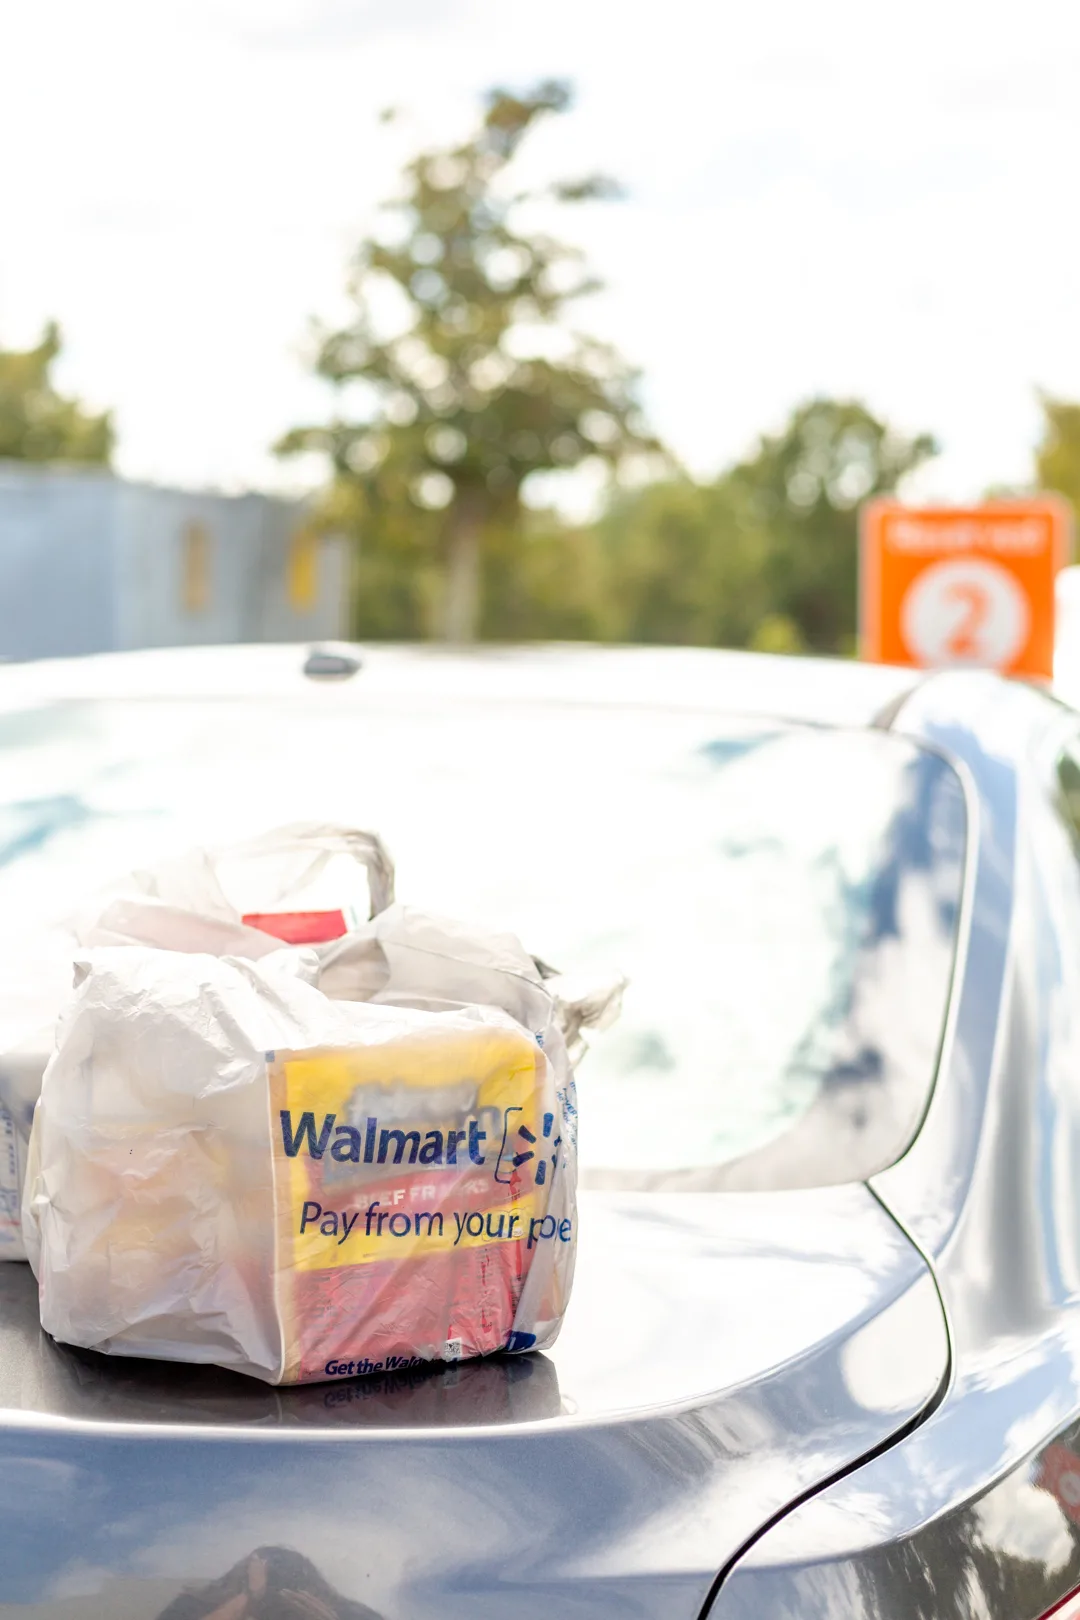 Walmart Online Grocery Pickup bags on top of a car